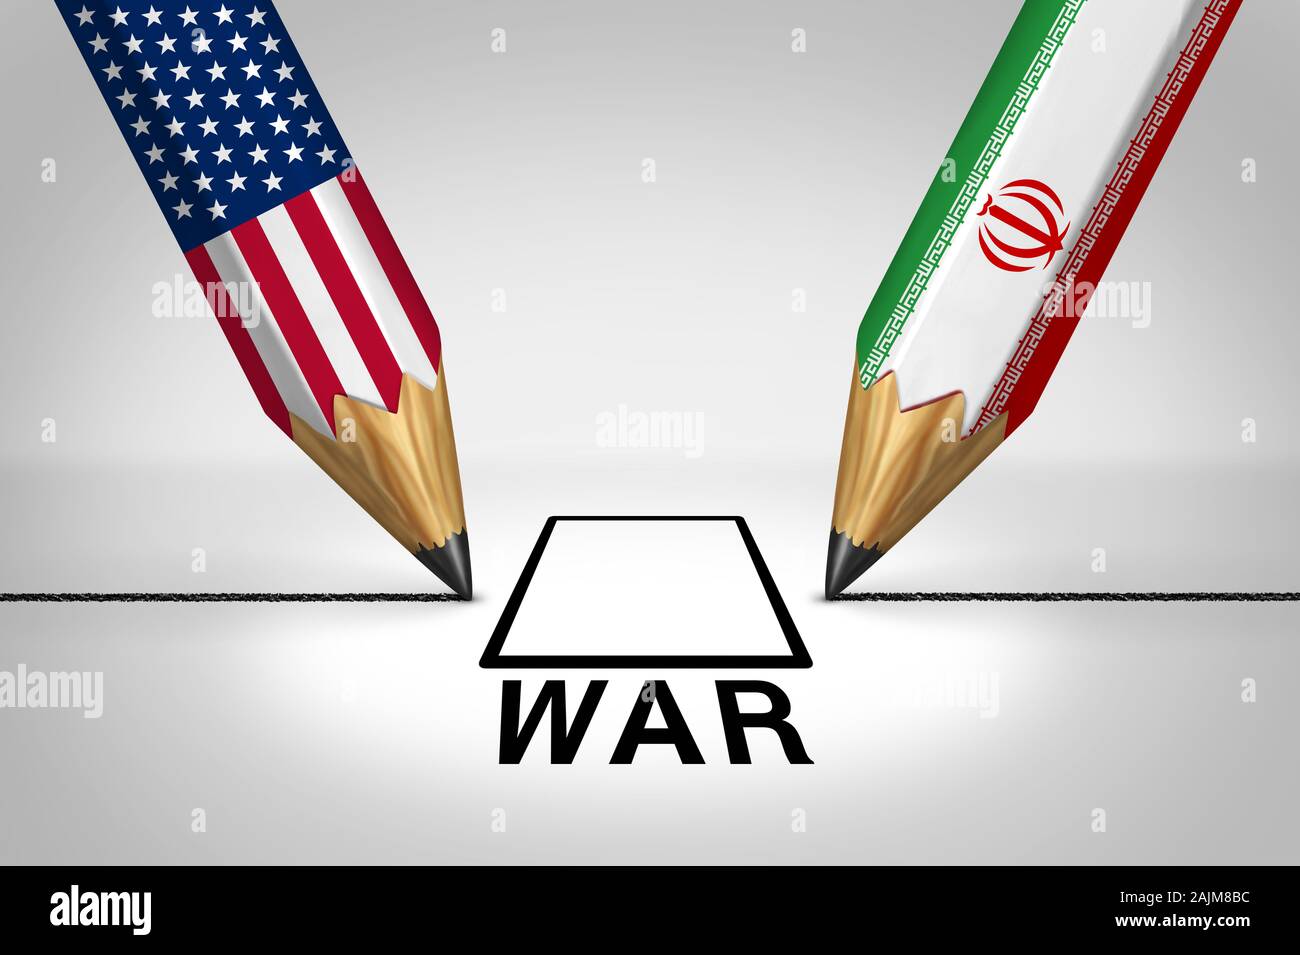 Iranian american war crisis as US military war tension conflict or United States middle east imminent threat risk concept as a security problem due to Stock Photo